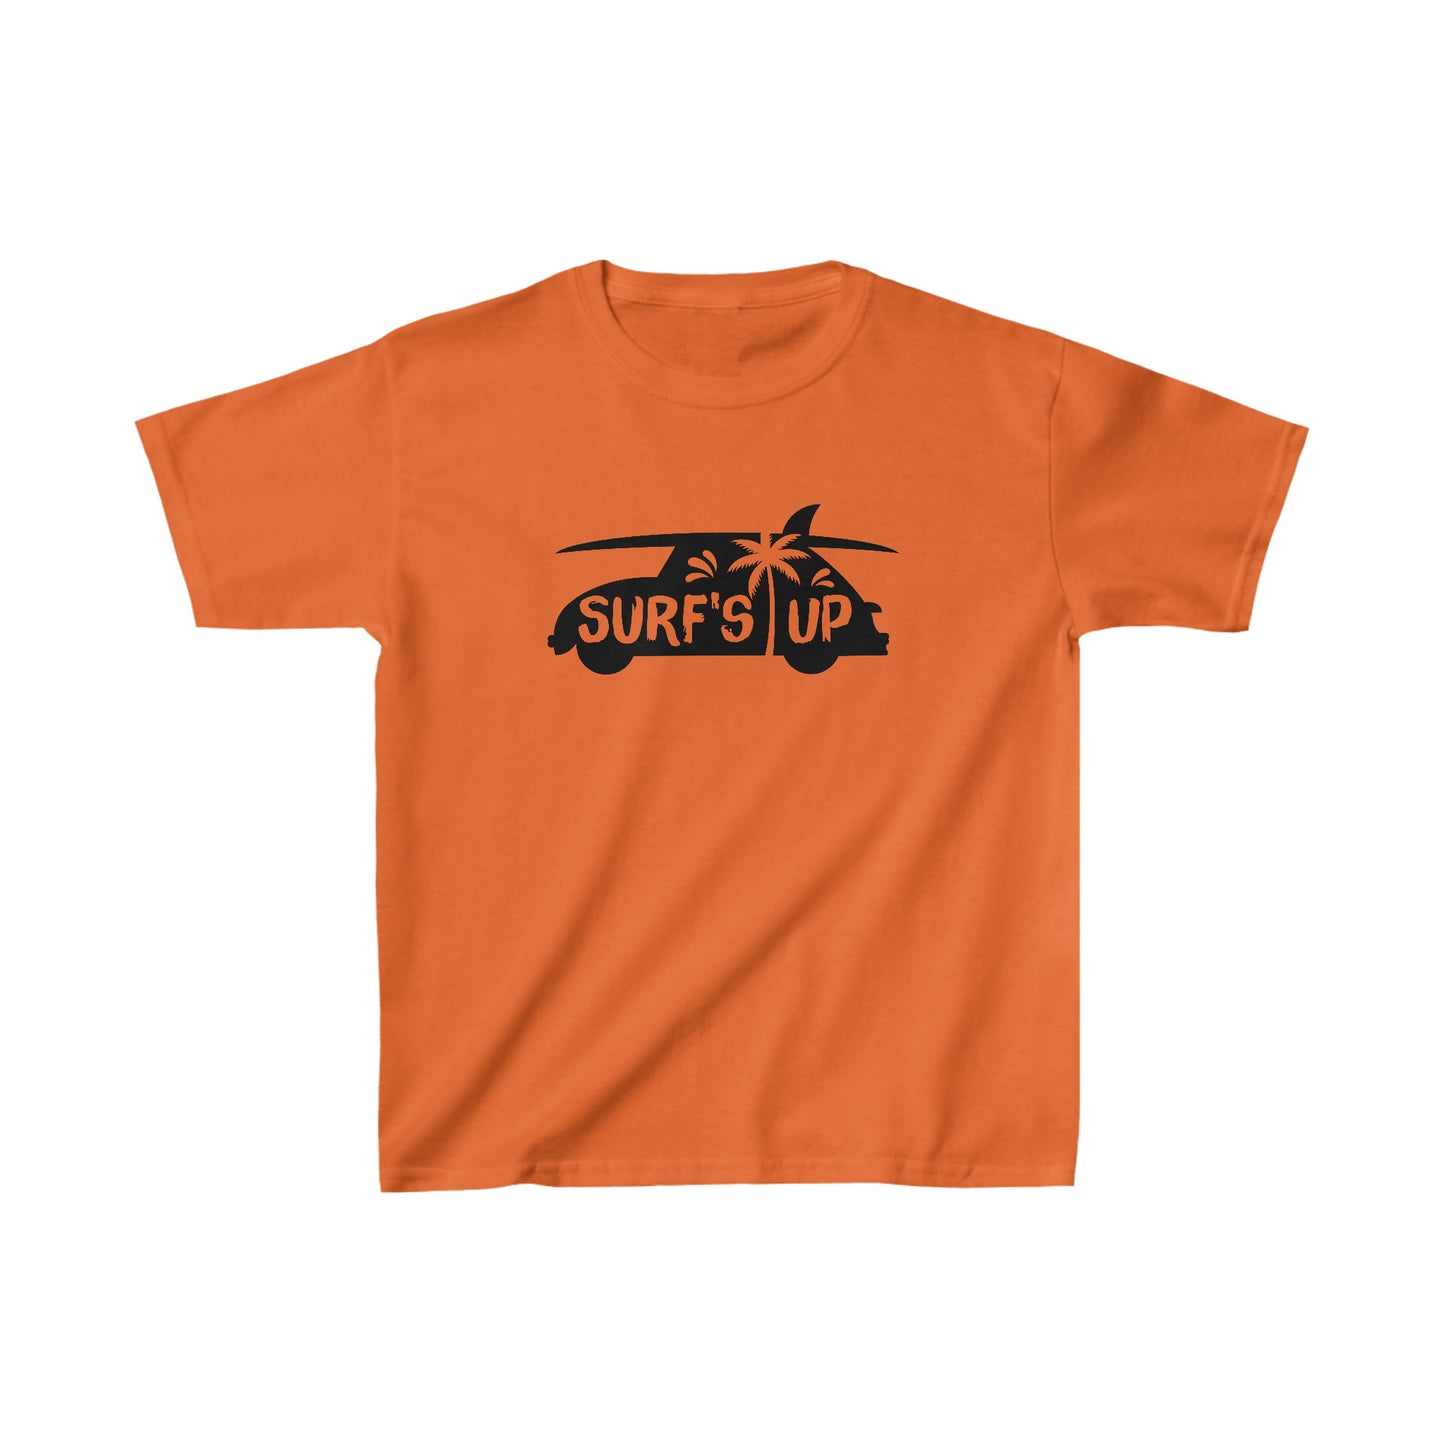 Surf's Up - Car and Surfboard Silhouette - Kids Heavy Cotton Tee